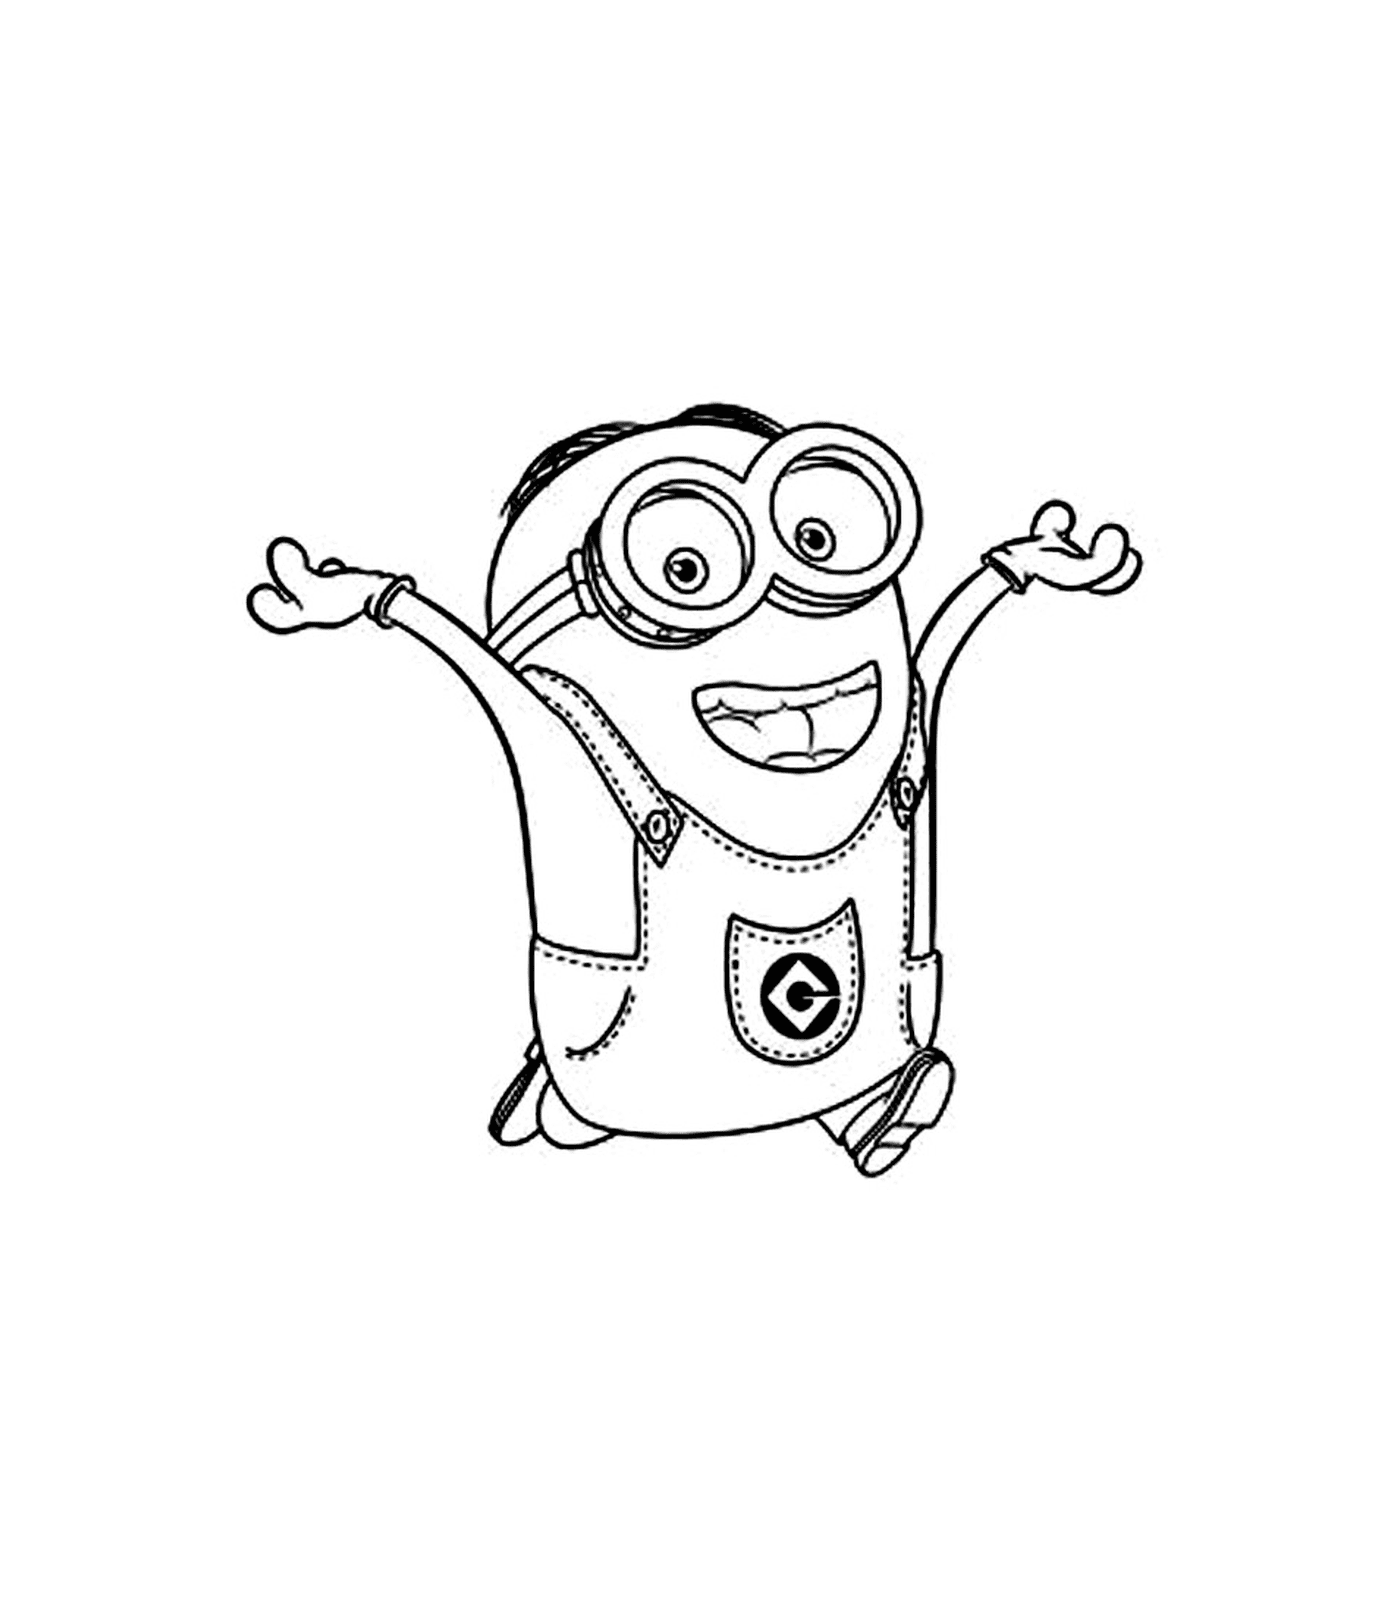  Minion with a smile, leap of joy 